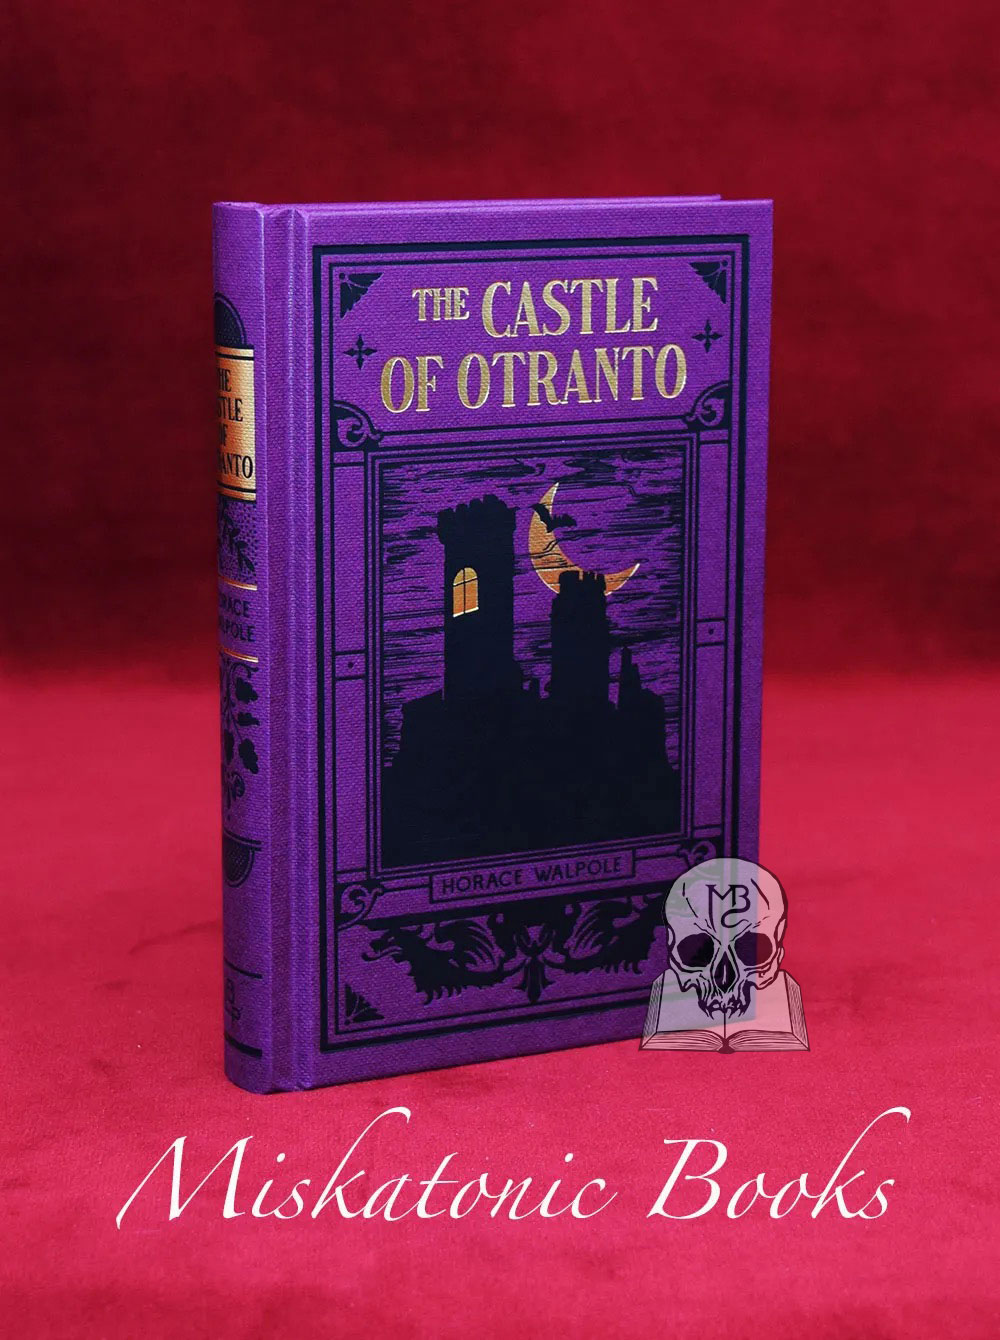 THE CASTLE OF OTRANTO by Horace Walpole (Hardcover First Edition)